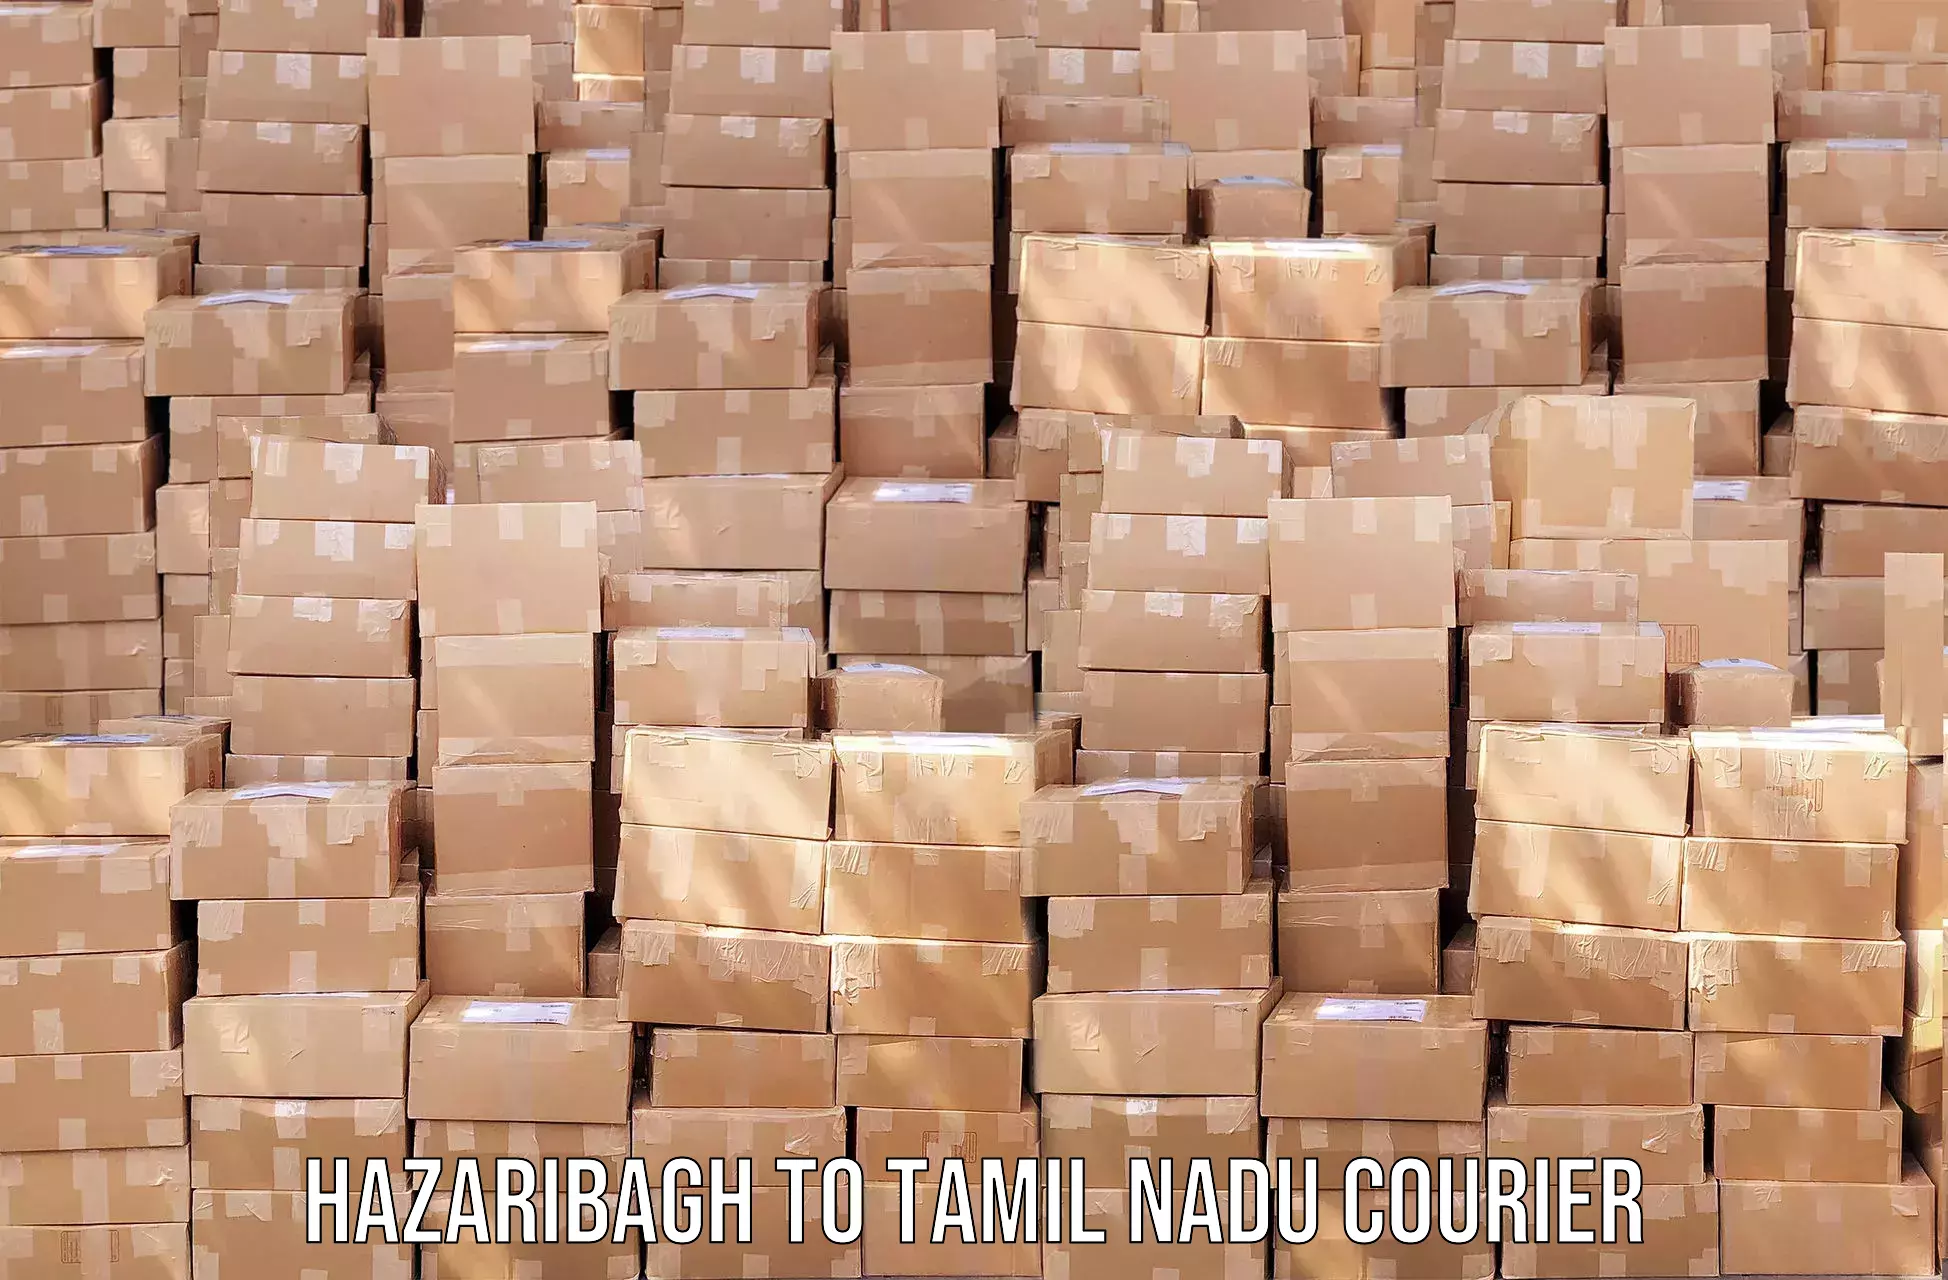 Global shipping solutions Hazaribagh to Tamil Nadu